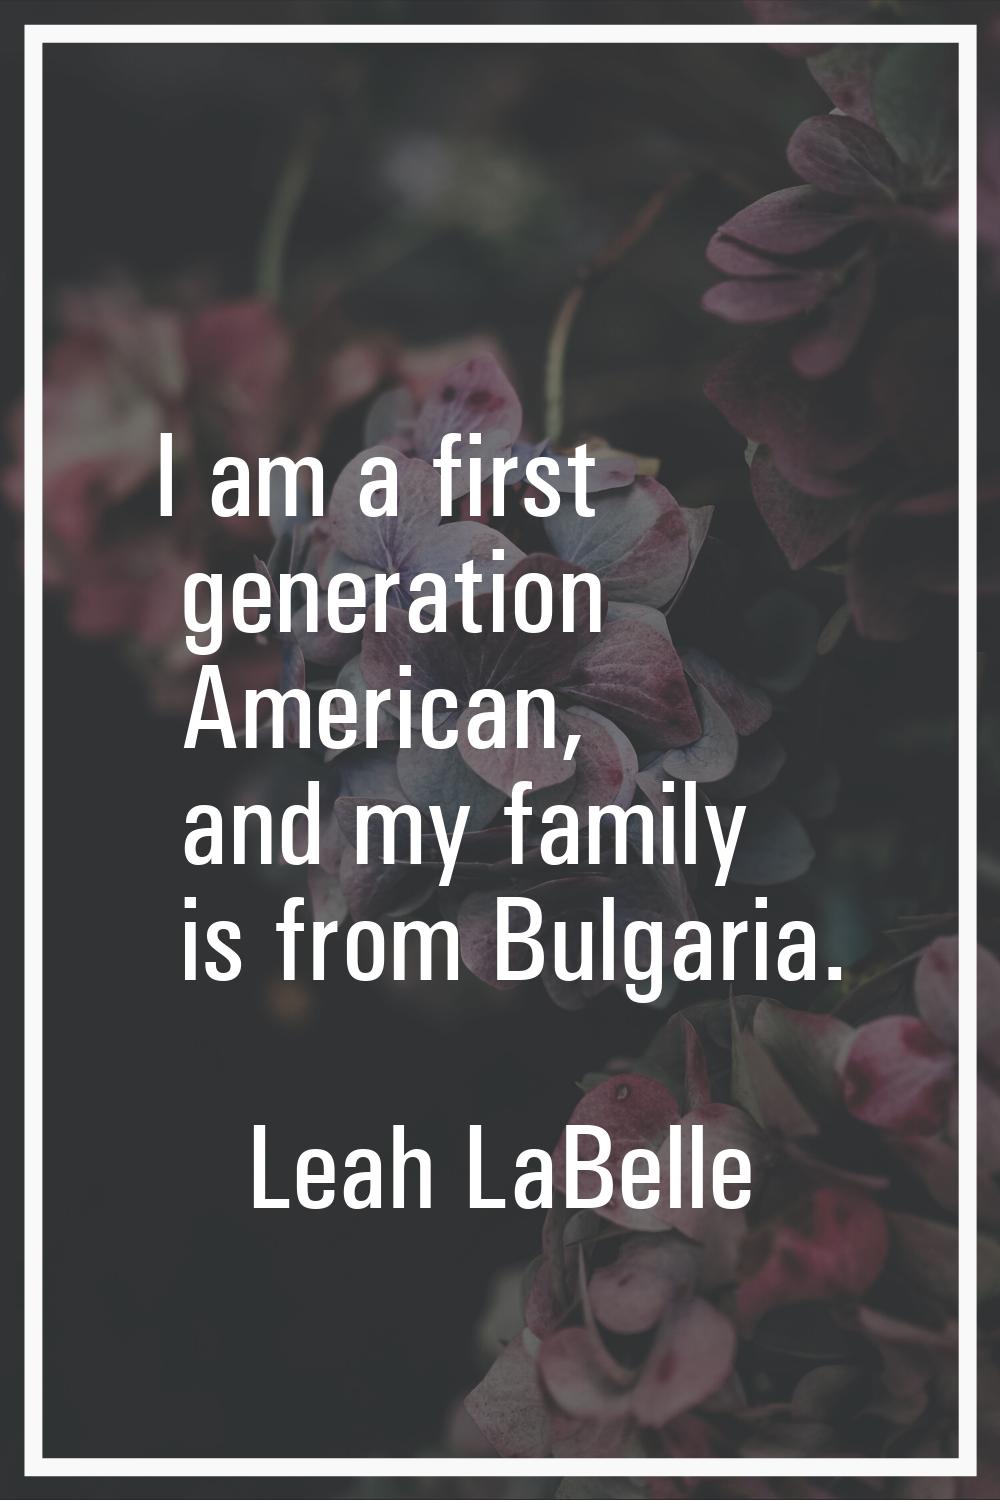 I am a first generation American, and my family is from Bulgaria.